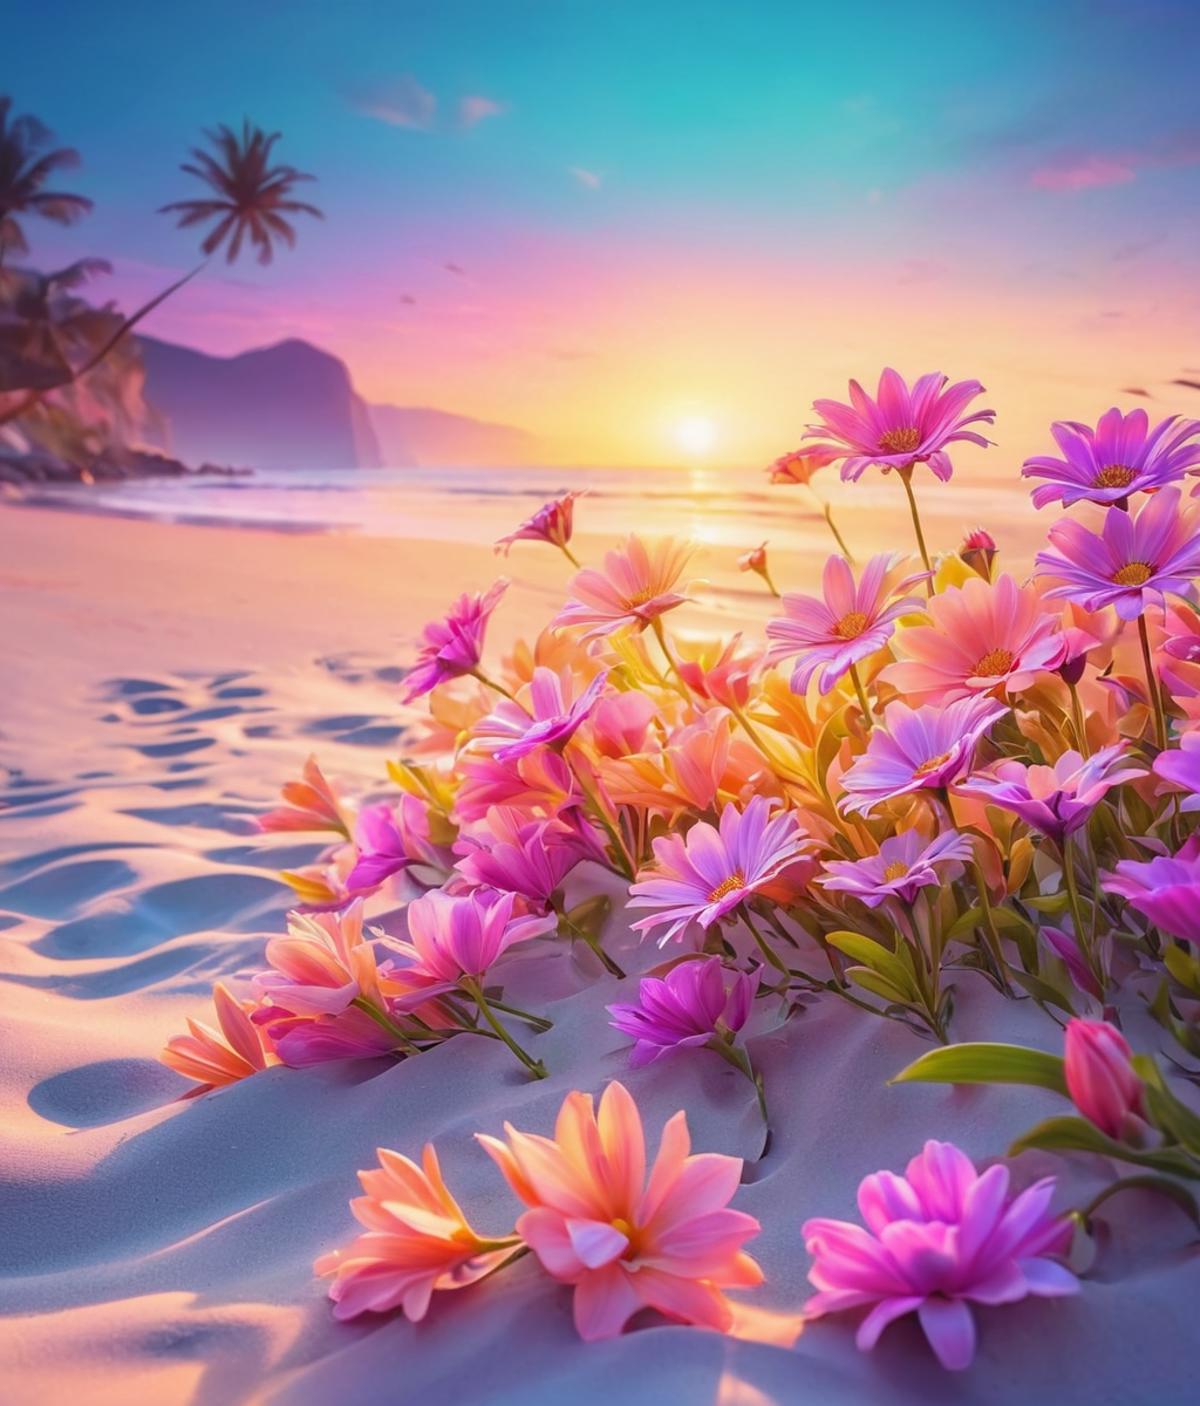 Flowers on the Beach at Sunset